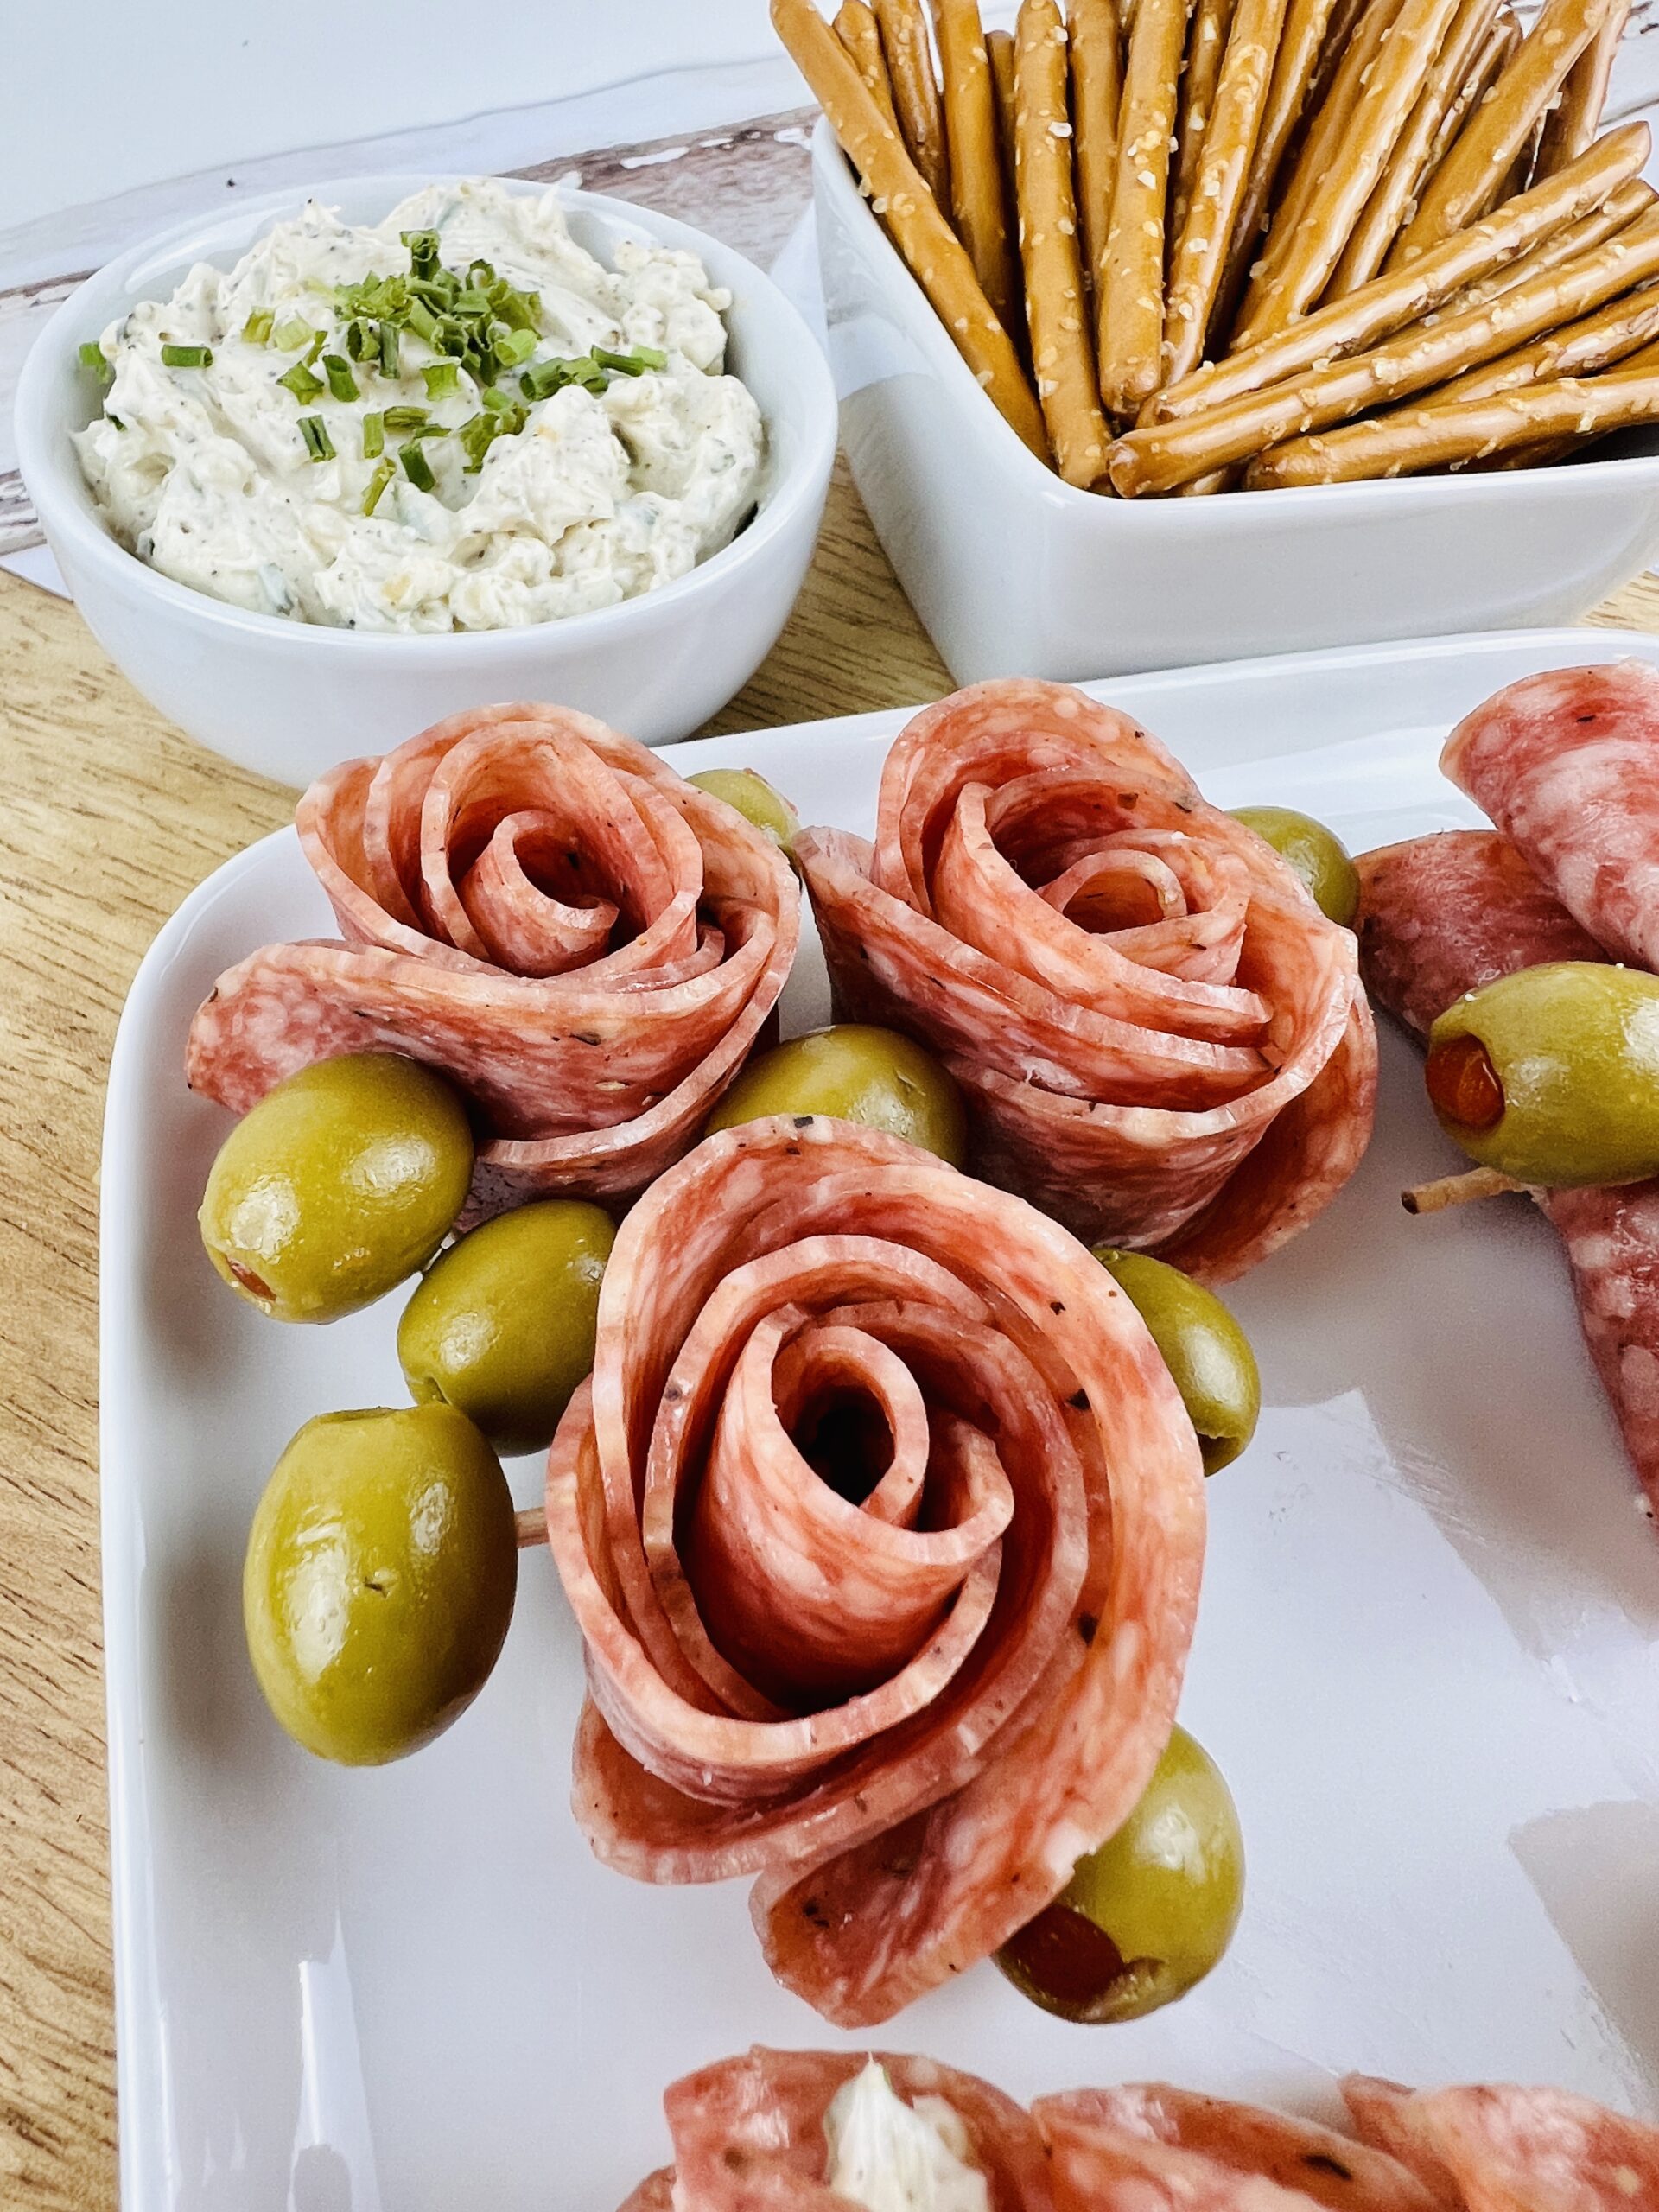 Olives and roses made from the meat.